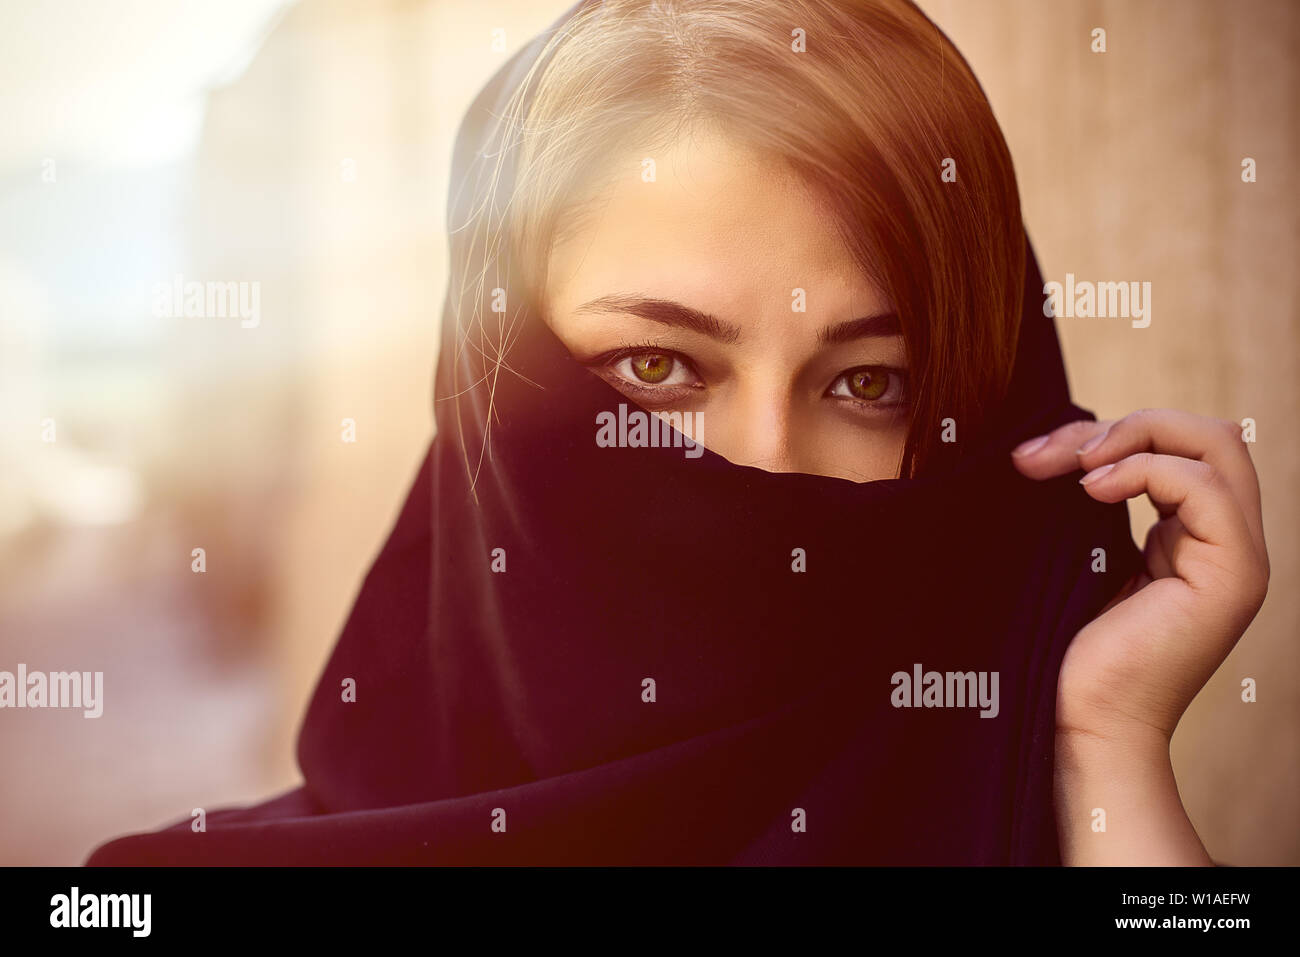 Beautiful Eyes Of Muslim Women With Face Covered In A Black Hijab In